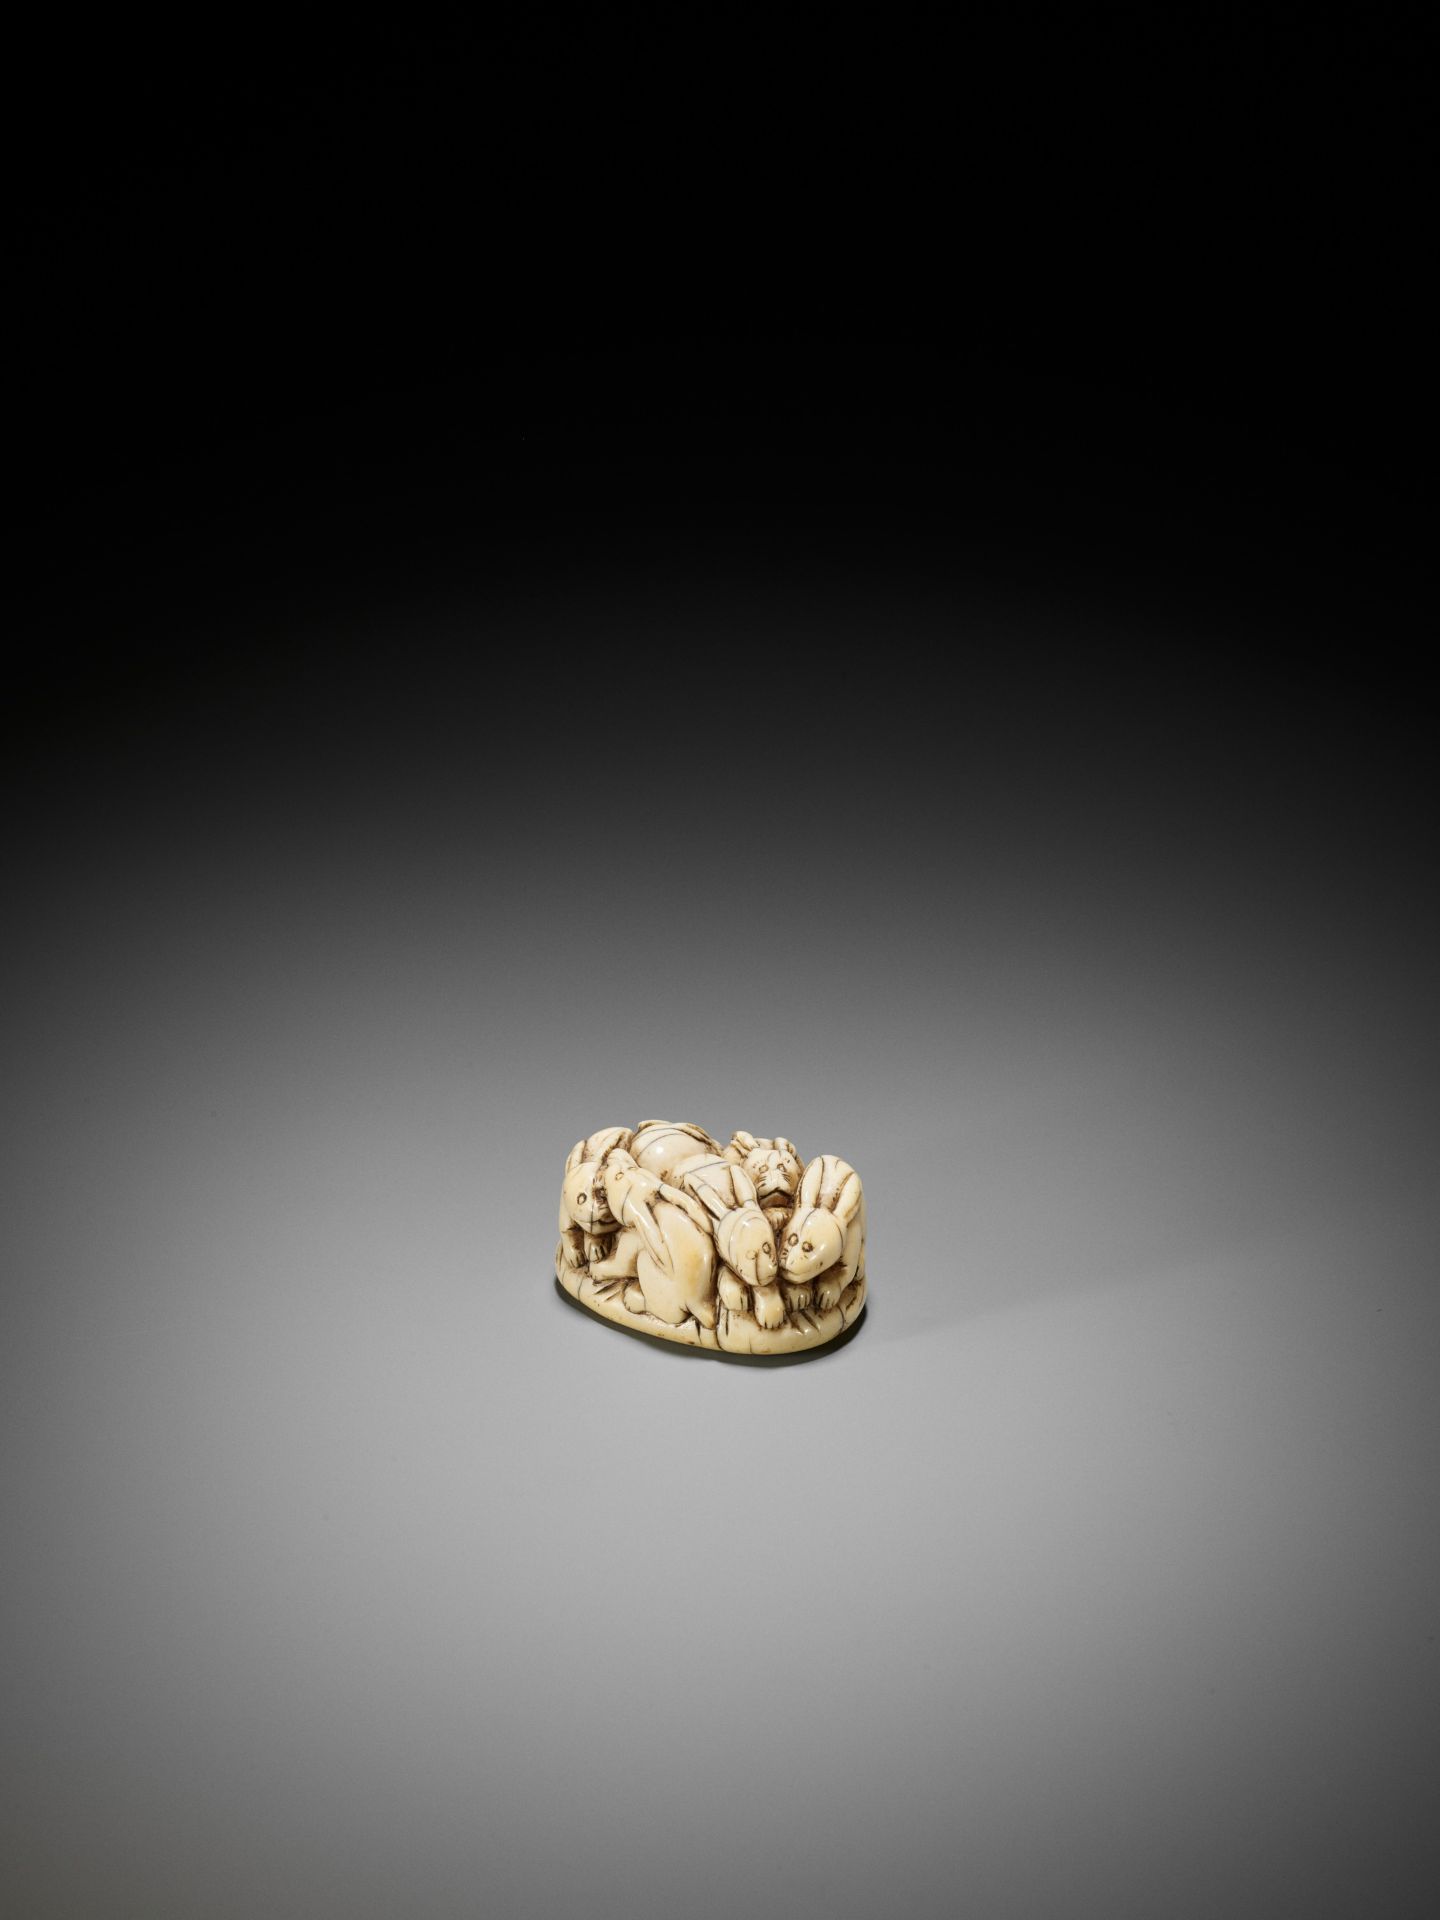 A RARE IVORY NETSUKE OF A PILE OF RABBITS - Image 2 of 8